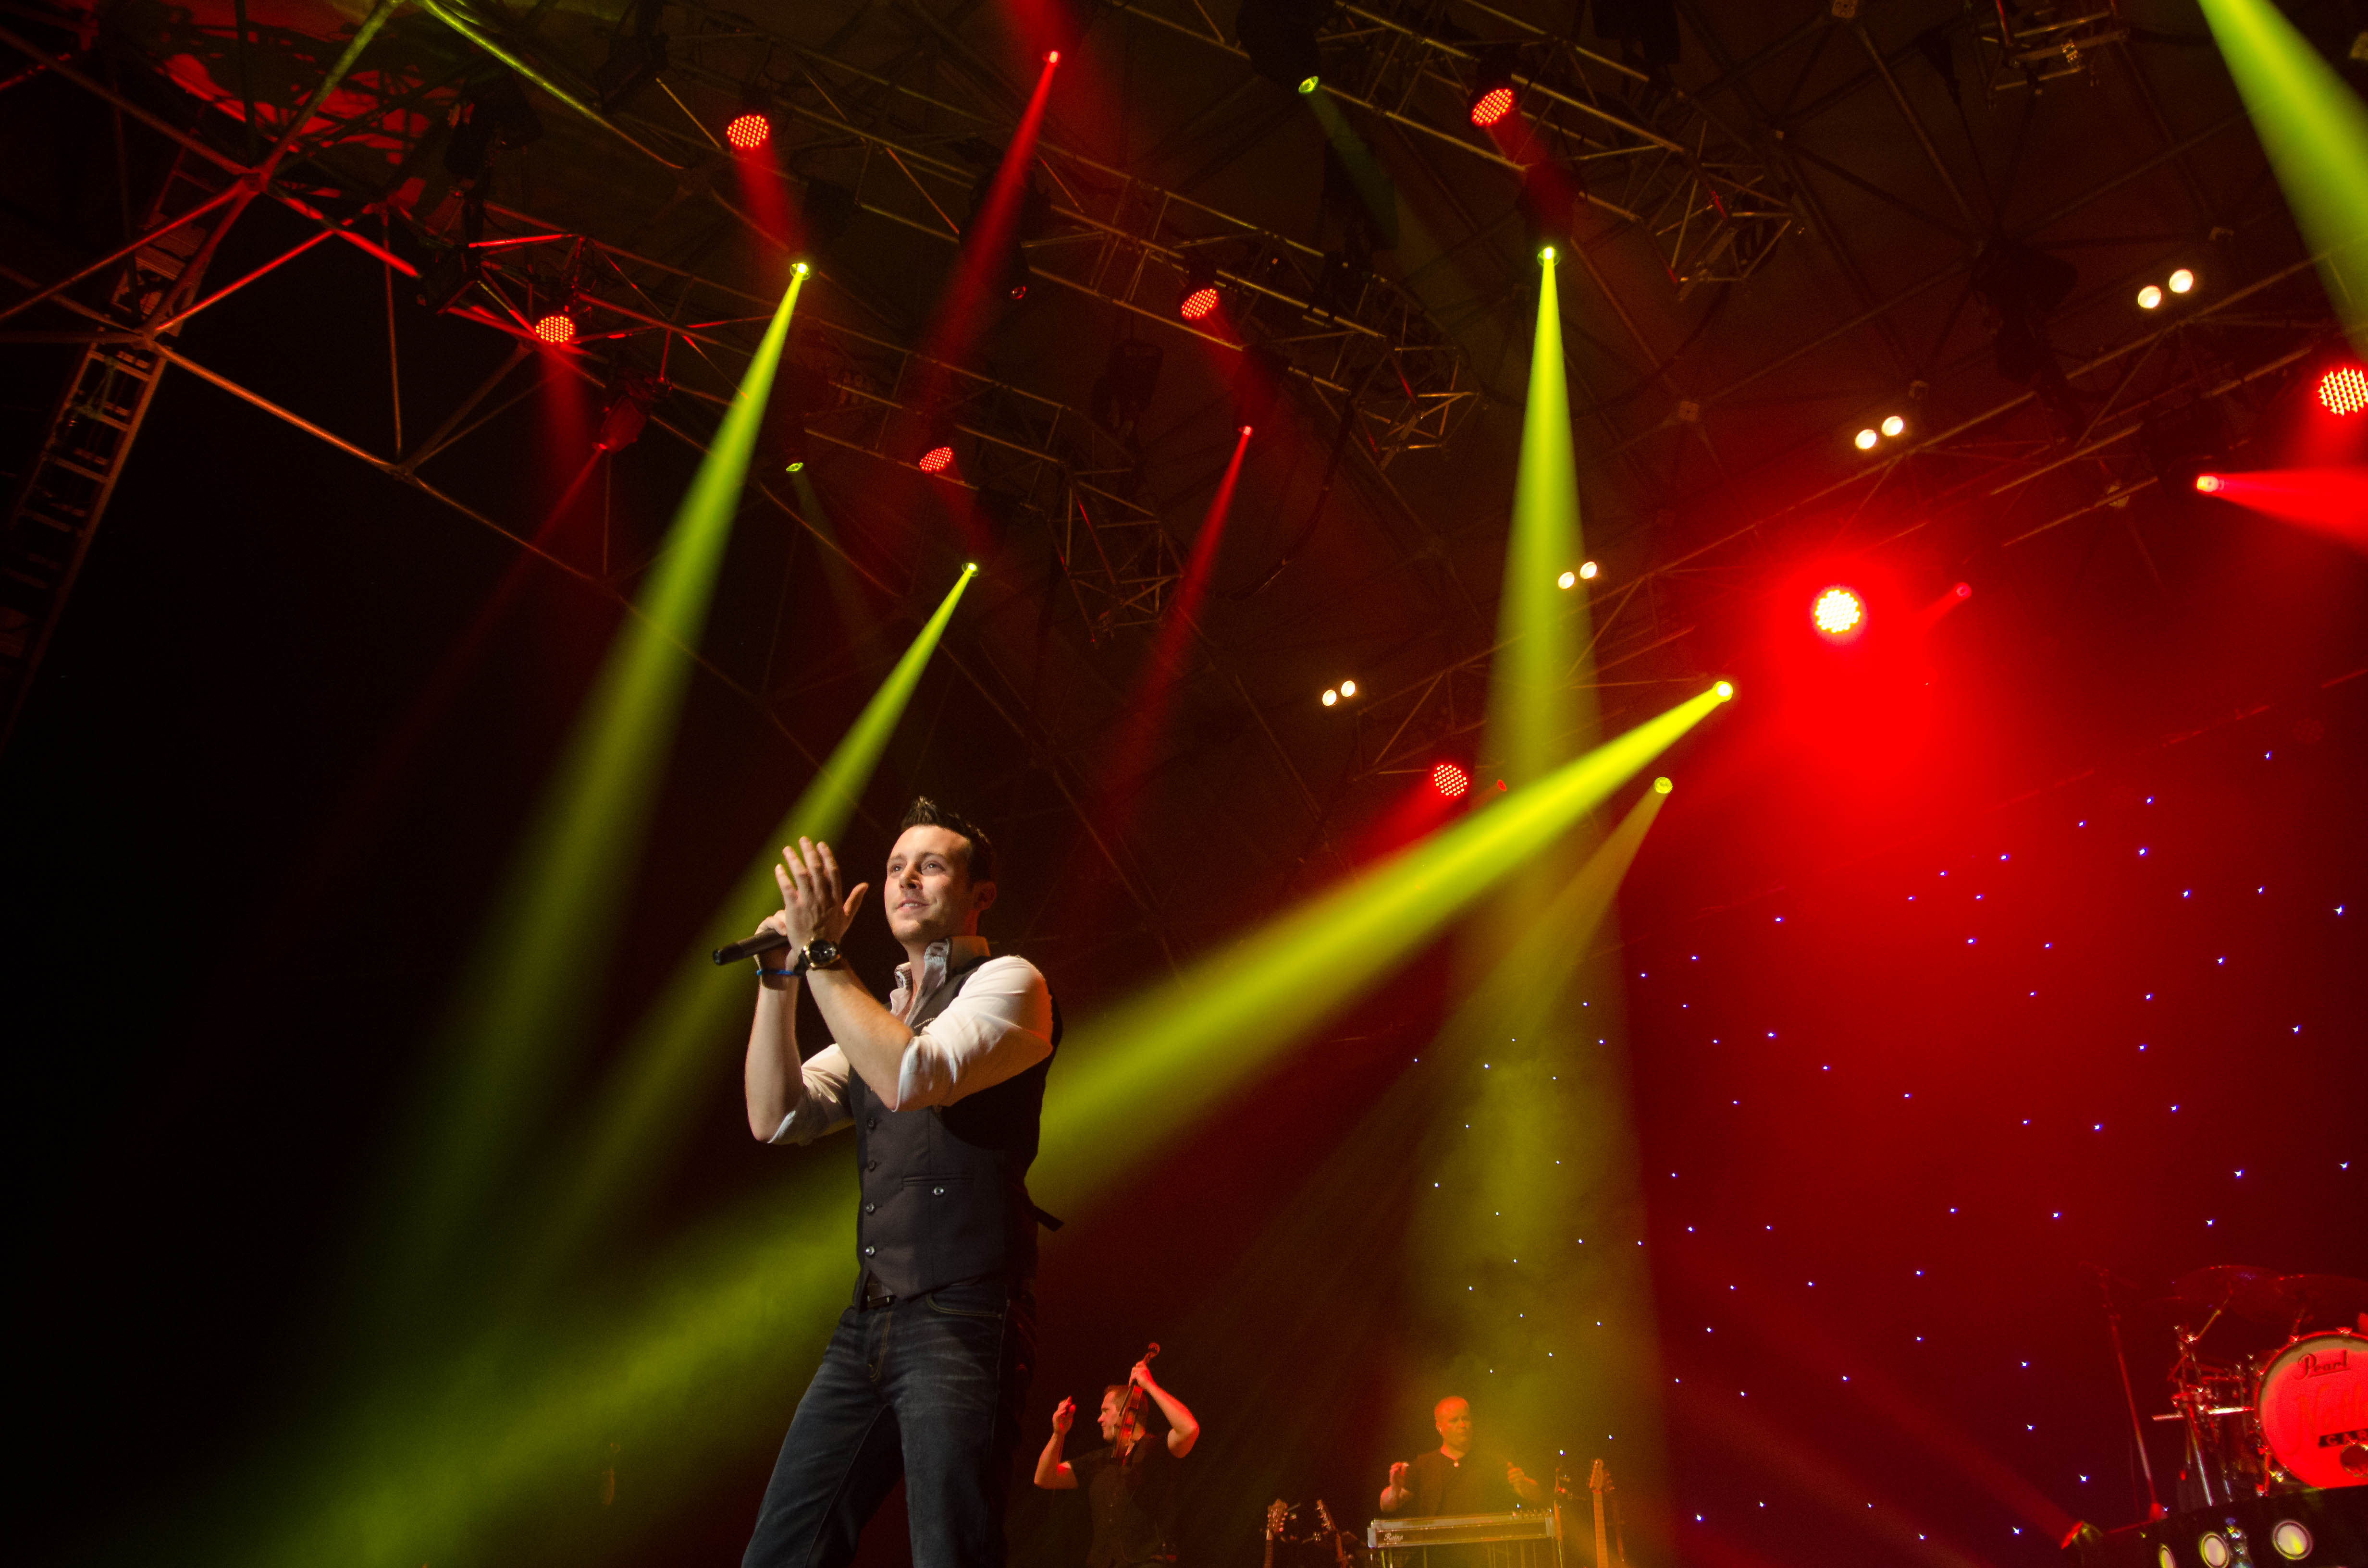 nathan-carter-at-the-marquee-cork-by-sean-smyth-15-6-14-16-of-55